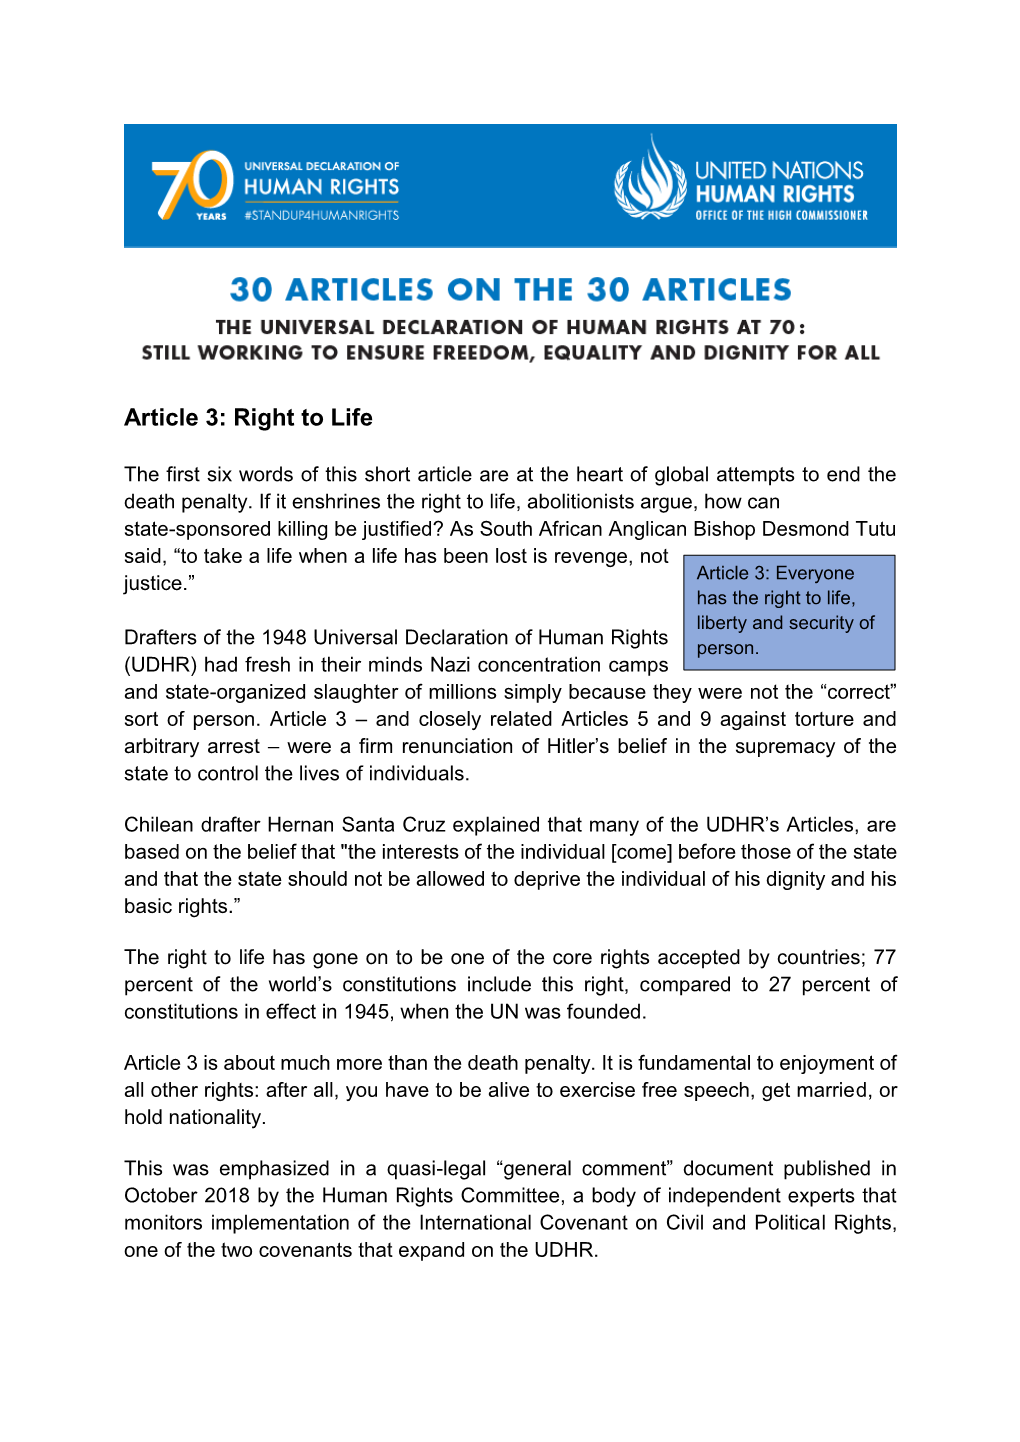 Article 3: Right to Life